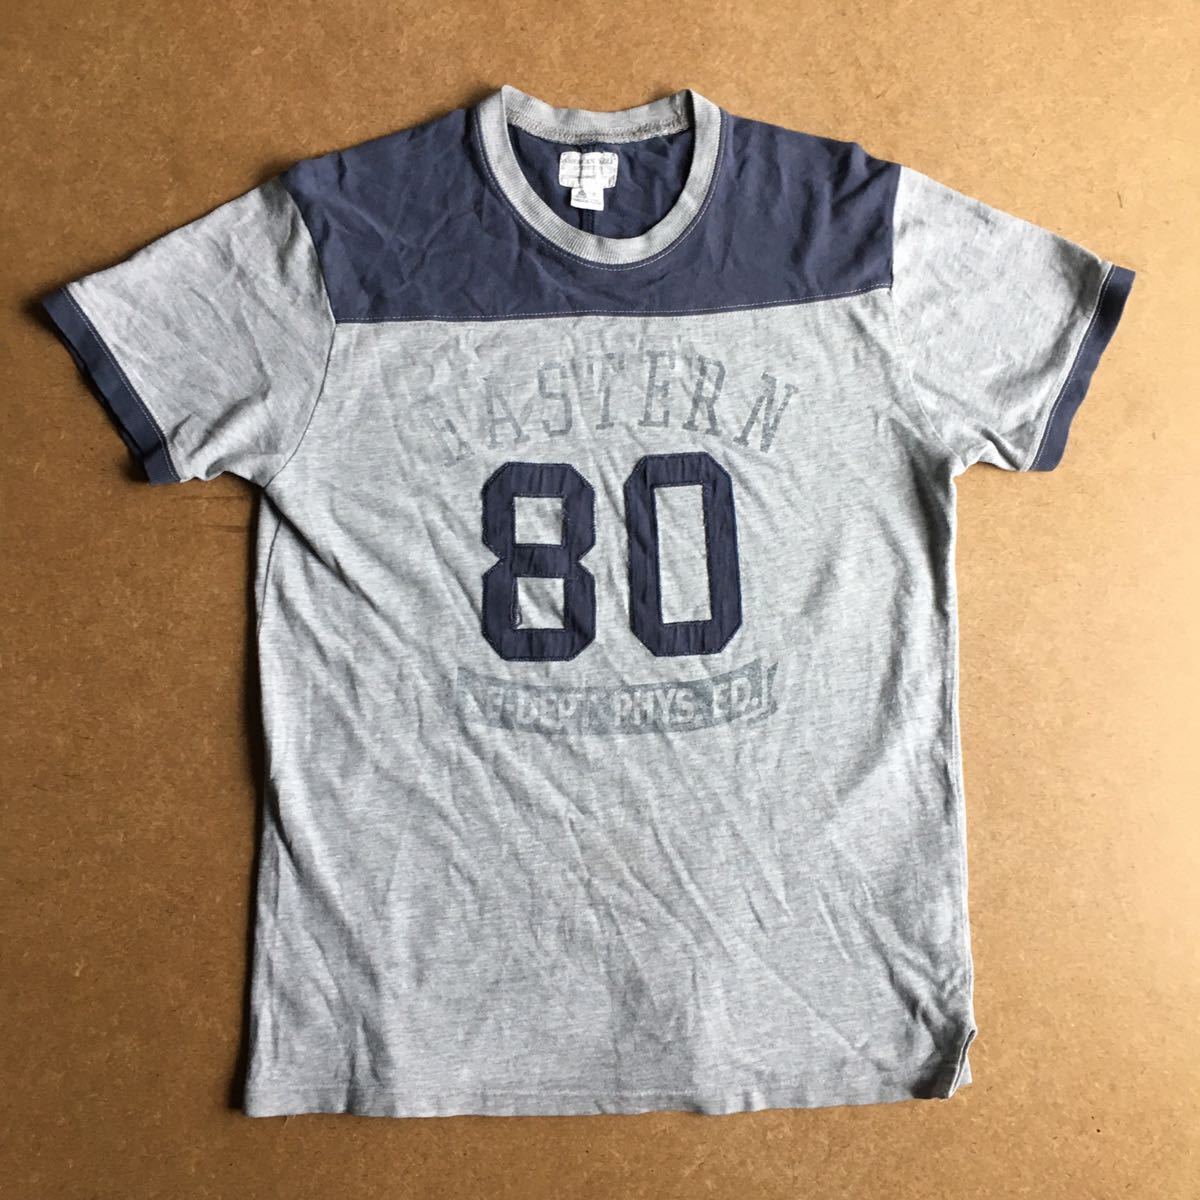 AMERICAN EAGLE OUTFITTERS アメリカンイーグル80 Tシャツネイビー×グレー XS_画像1